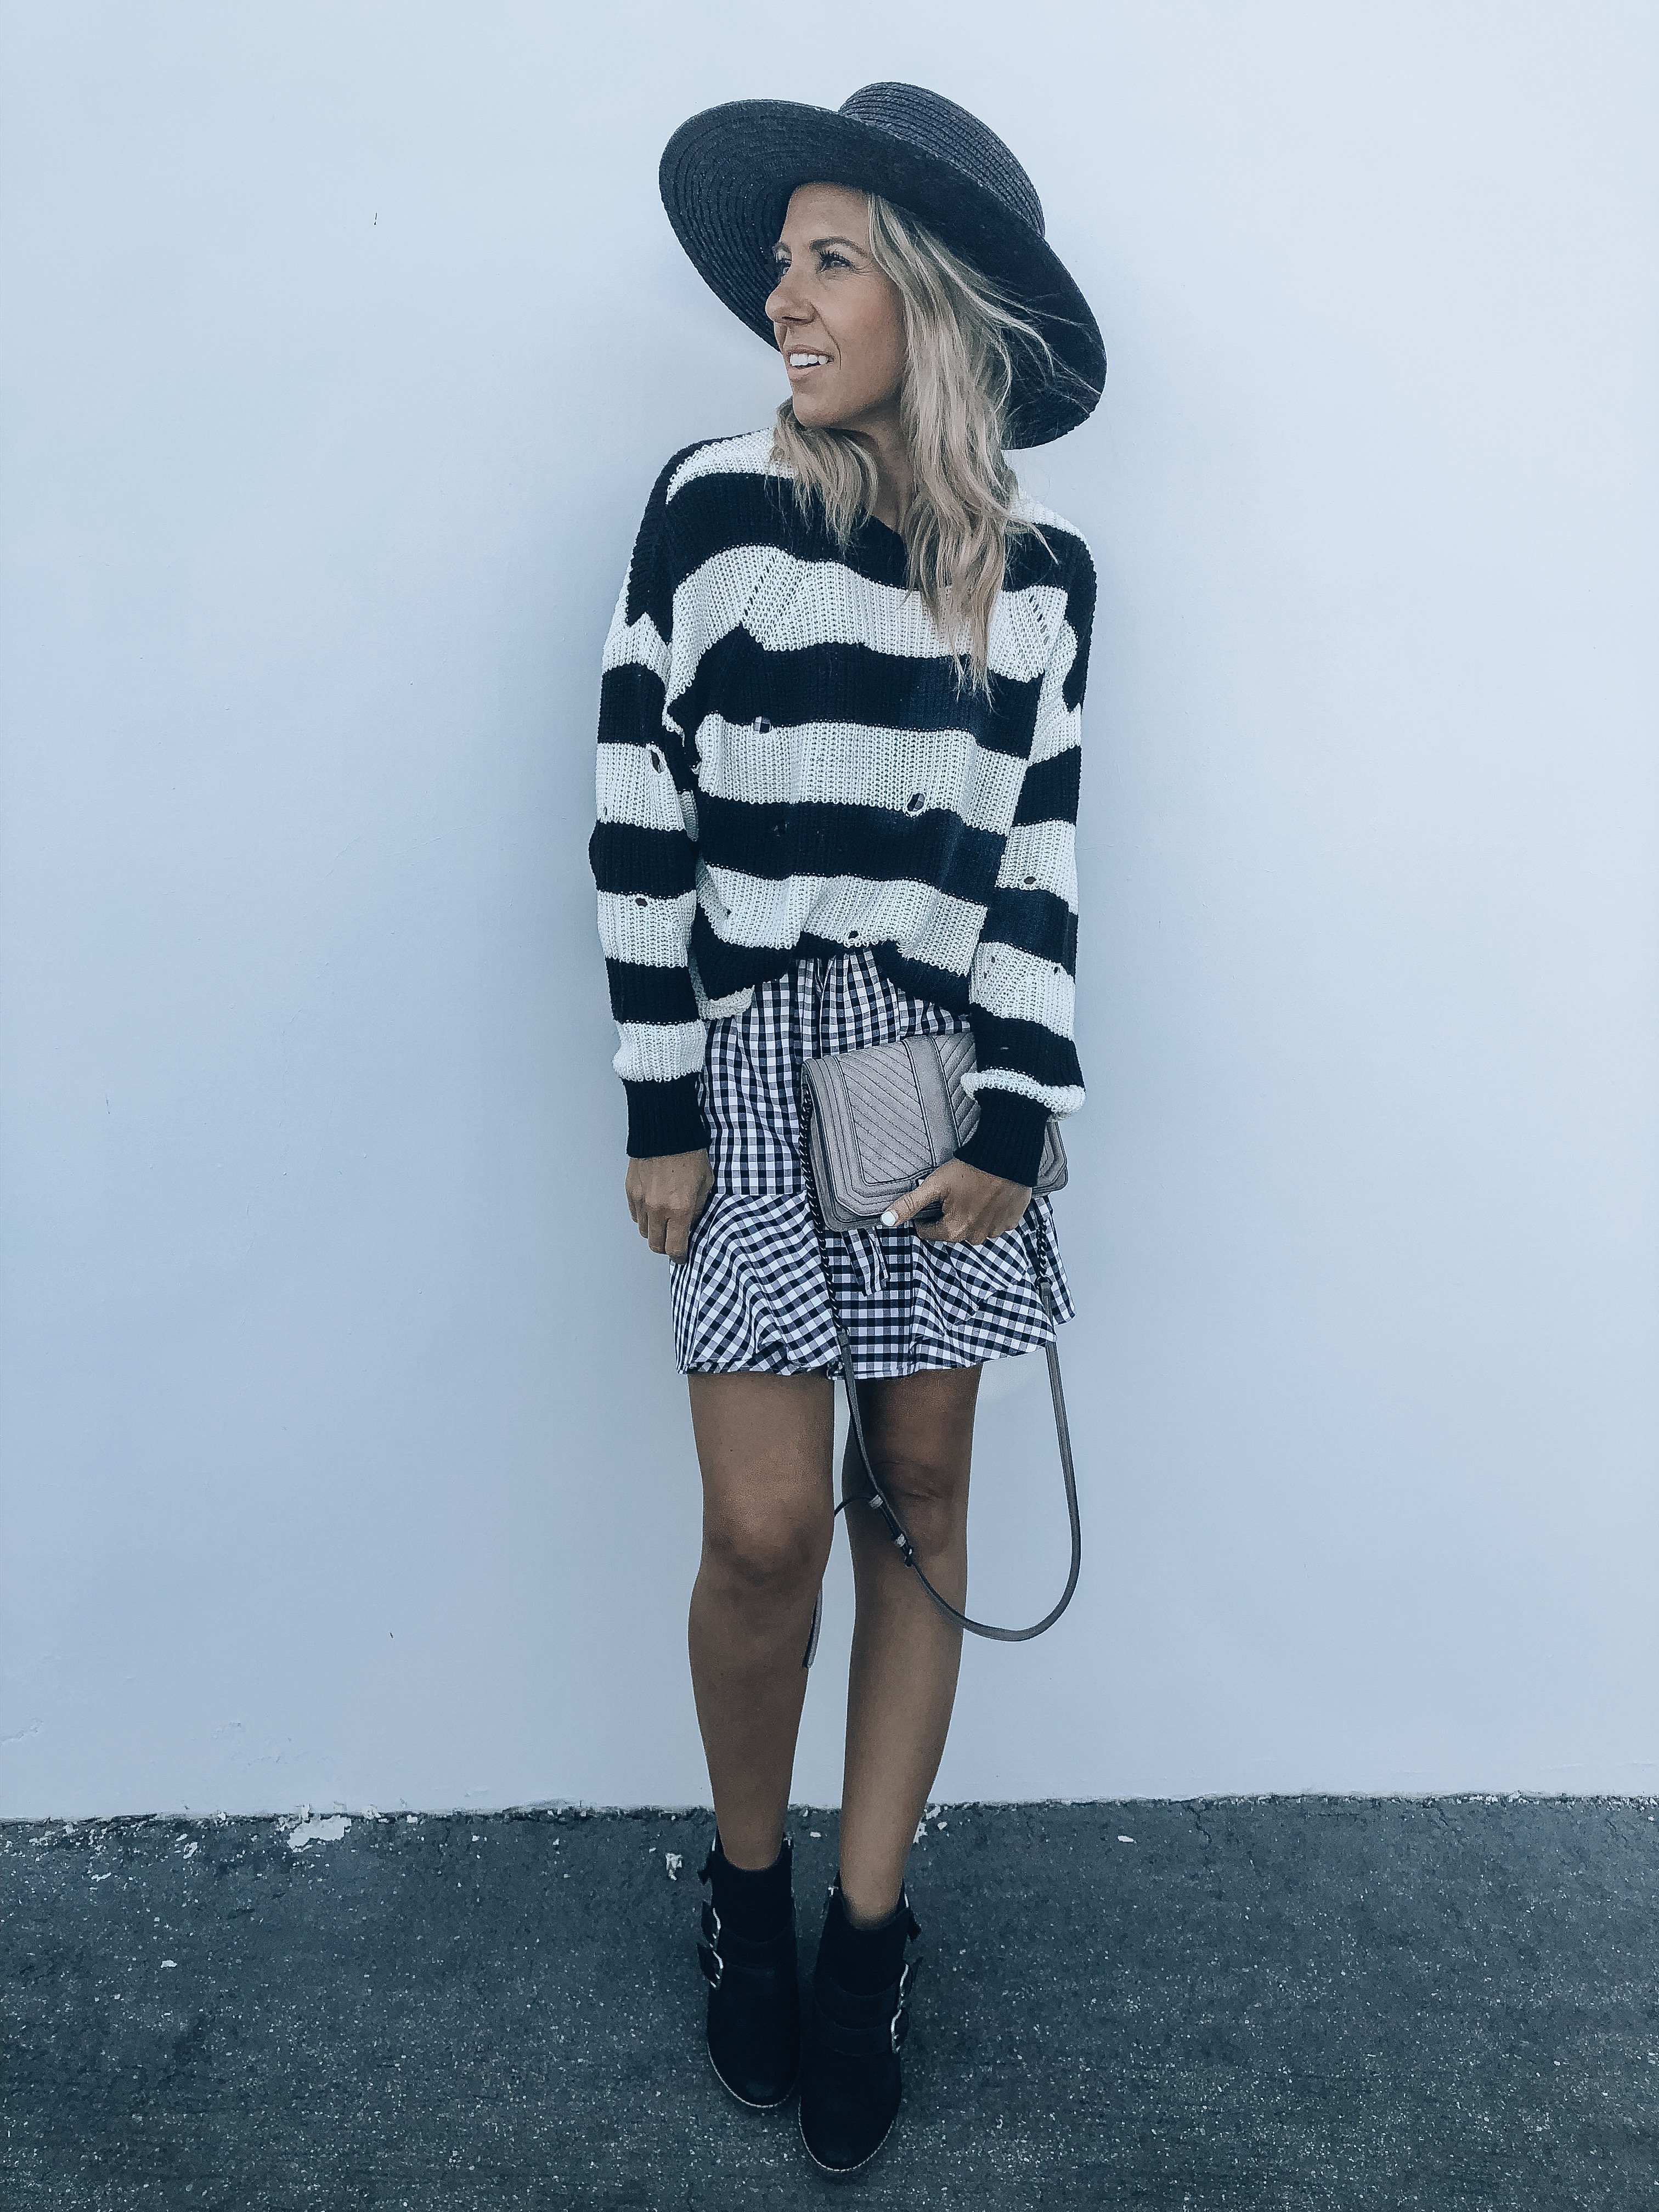 MY TIPS FOR SHOPPING THE NORDSTROM ANNIVERSARY SALE + $750 GIFT CARD GIVEAWAY- Jaclyn De Leon Style +SHOPPING THE SALE + ONLINE SHOPPING + FALL PREVIEW SALE + FALL TRENDS + BLACK AND WHITE STRIPES + GINGHAM +WHAT TO BUY